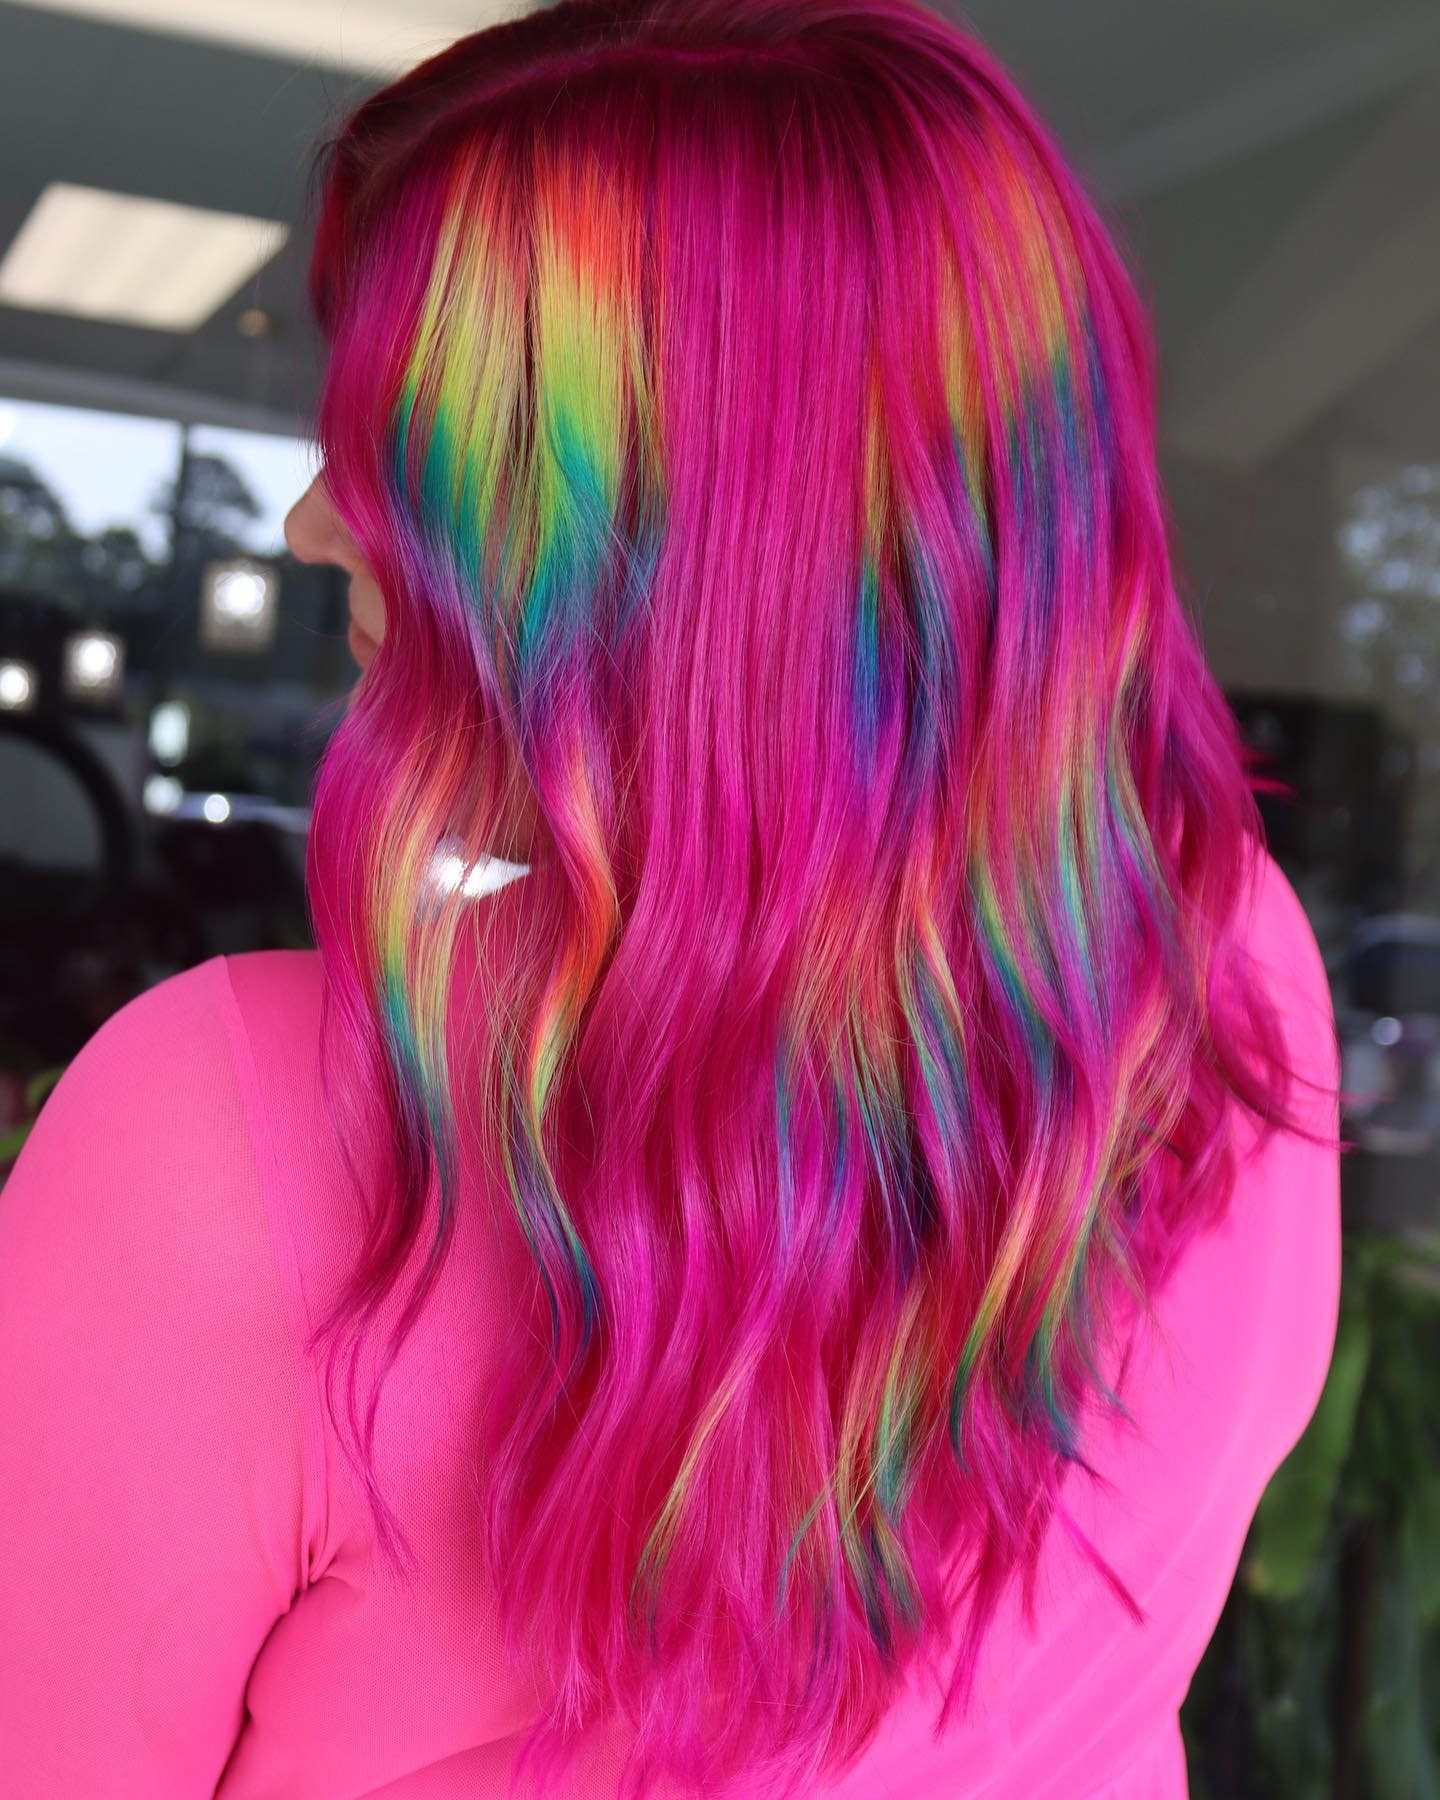 This Danger Jones masterpiece by Ashlee is giving what it needed to give &amp; MORE. 😍💗

It&rsquo;s safe to say we are obsessed. 🙌

#salon #hair #beauty #haircut #hairstylist #haircolor #hairstyles #hairstyle #cary #hairsalon #carync #balayage #ha